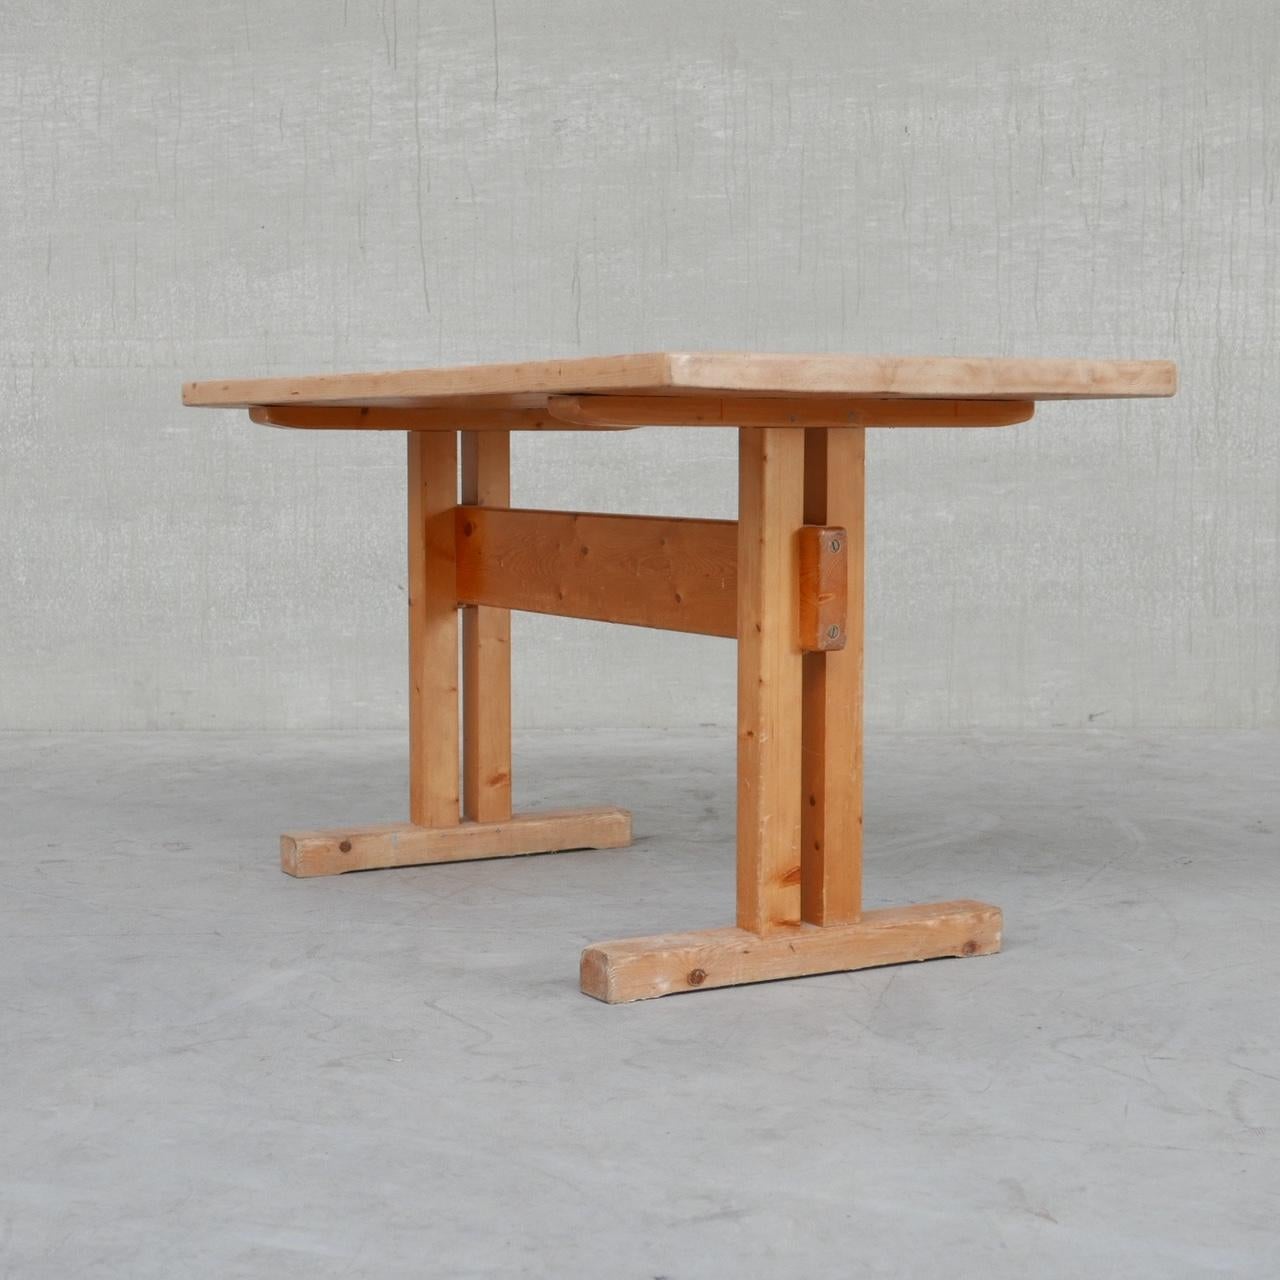 A blonde pine dining table designed by Charlotte Perriand for Les Arcs ski resort. 

France, c1960s. 

One of a run of 10 dining tables of varying sizes and condition we have sourced from Les Arcs. 

Timeless design from an amazing design